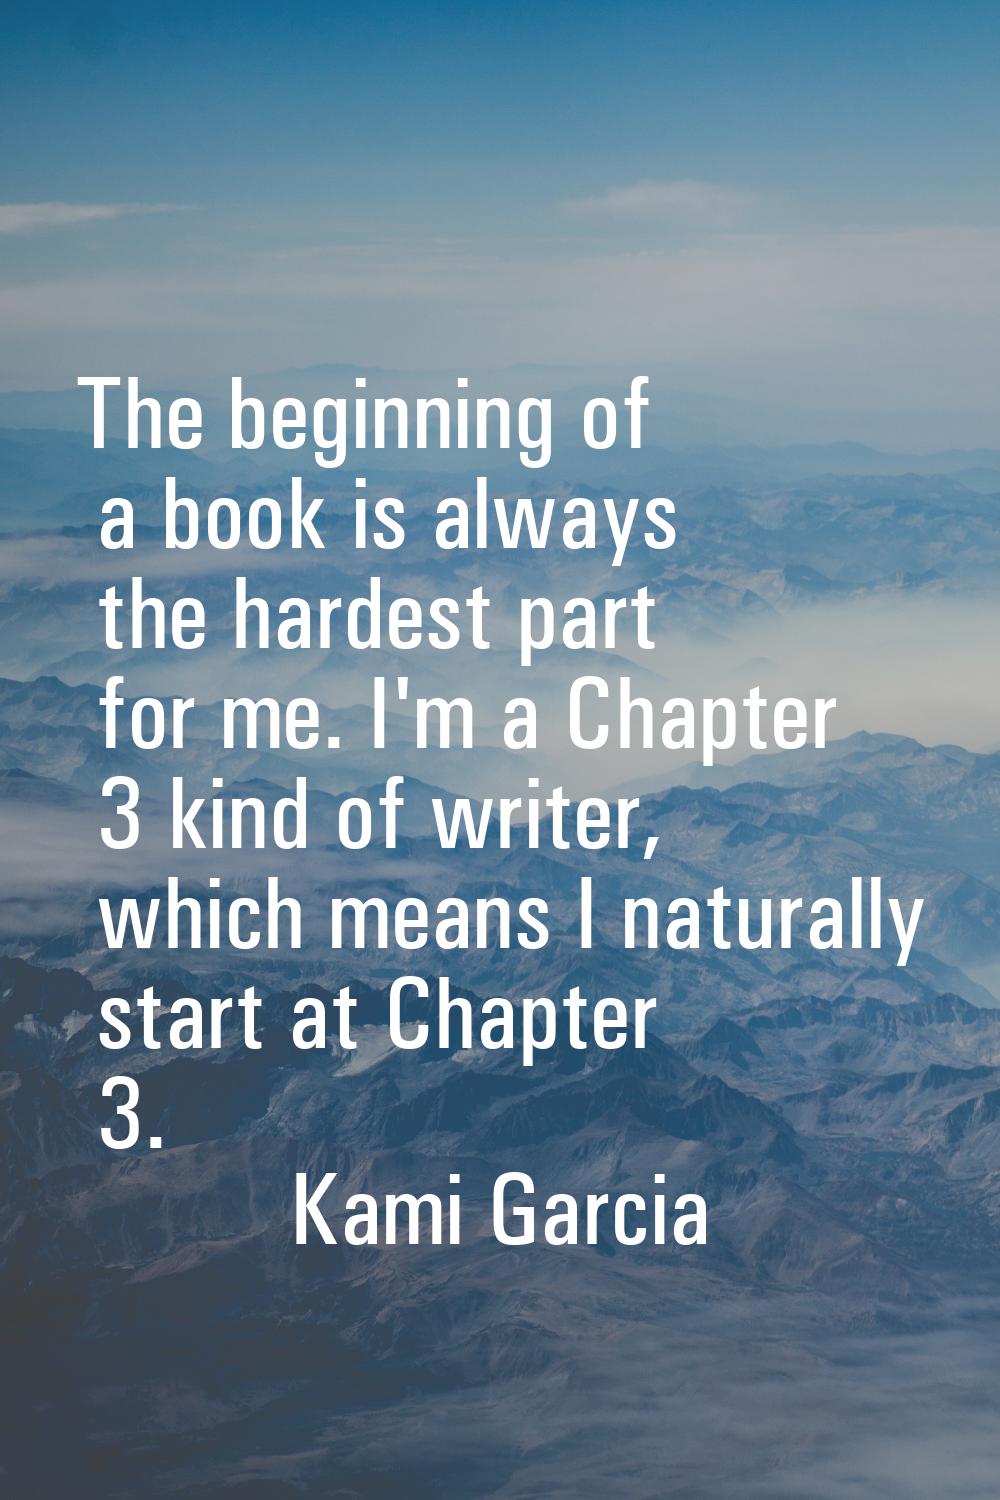 The beginning of a book is always the hardest part for me. I'm a Chapter 3 kind of writer, which me